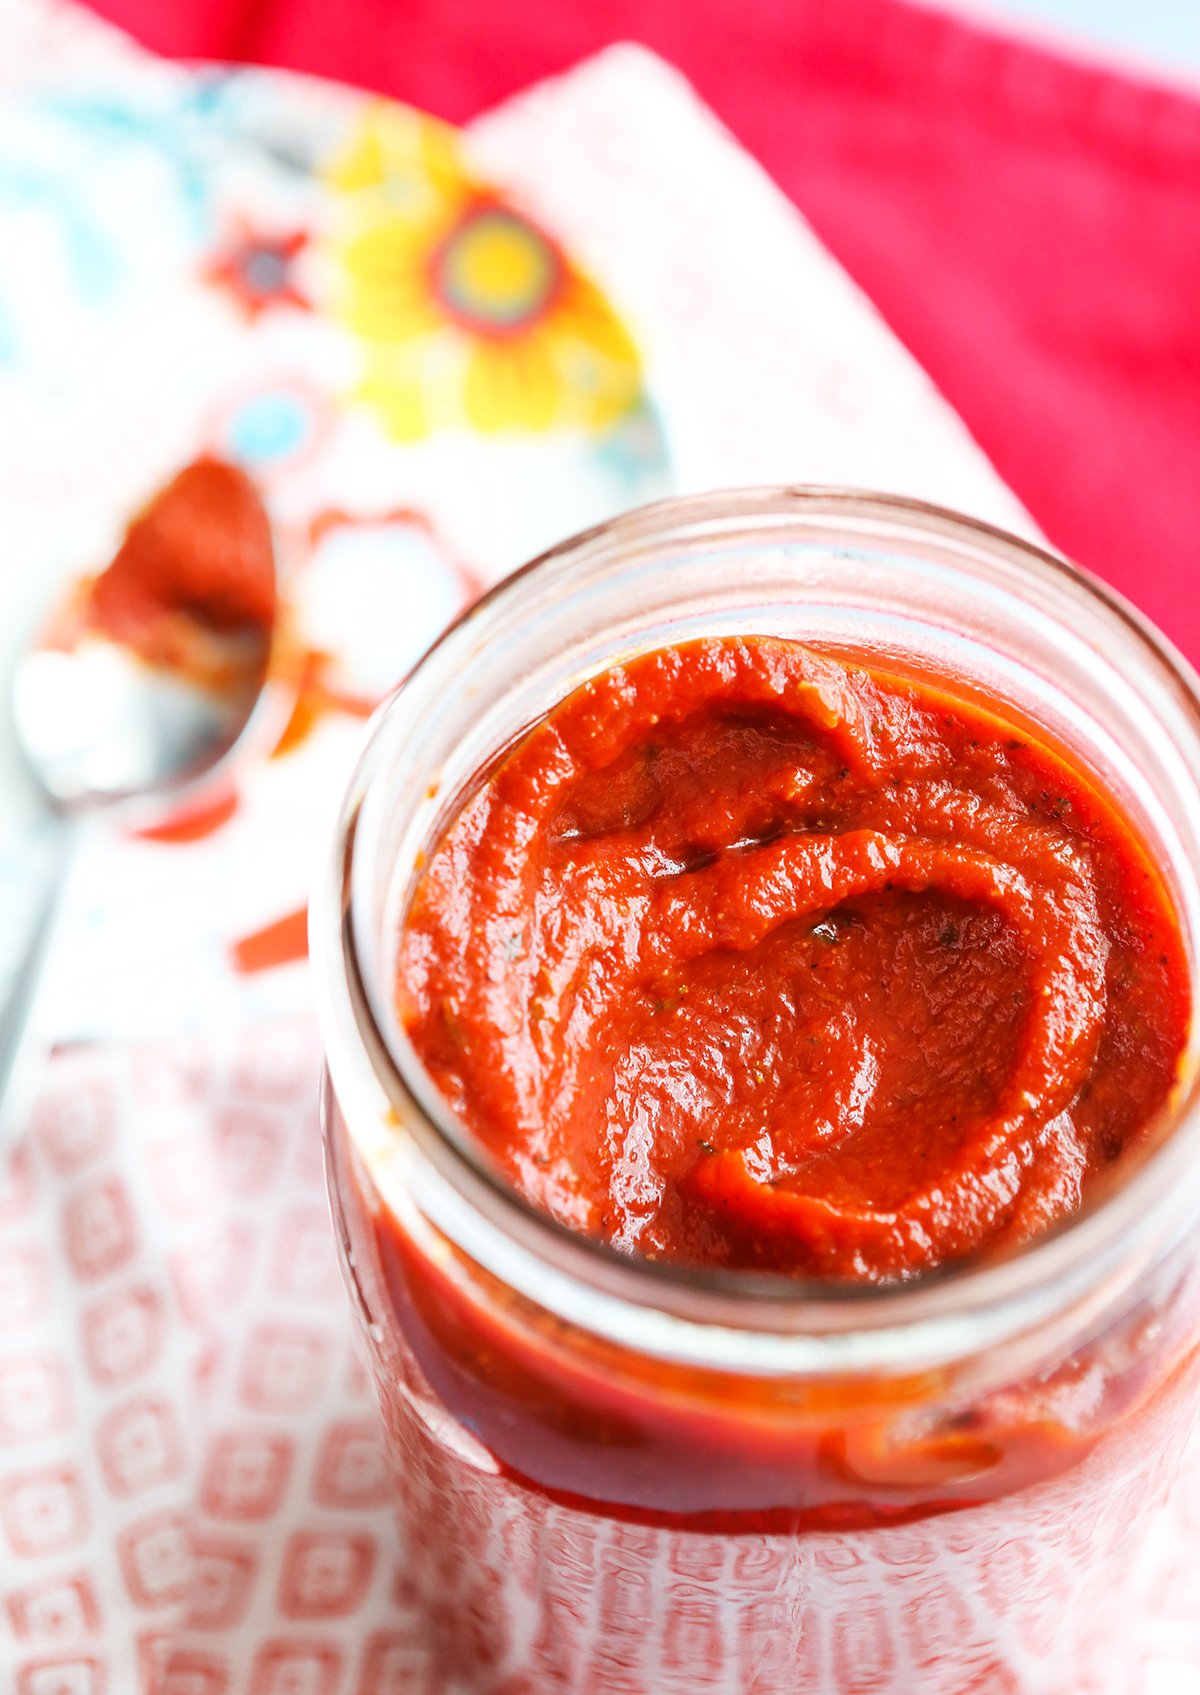 Mason jar filled with pizza sauce.